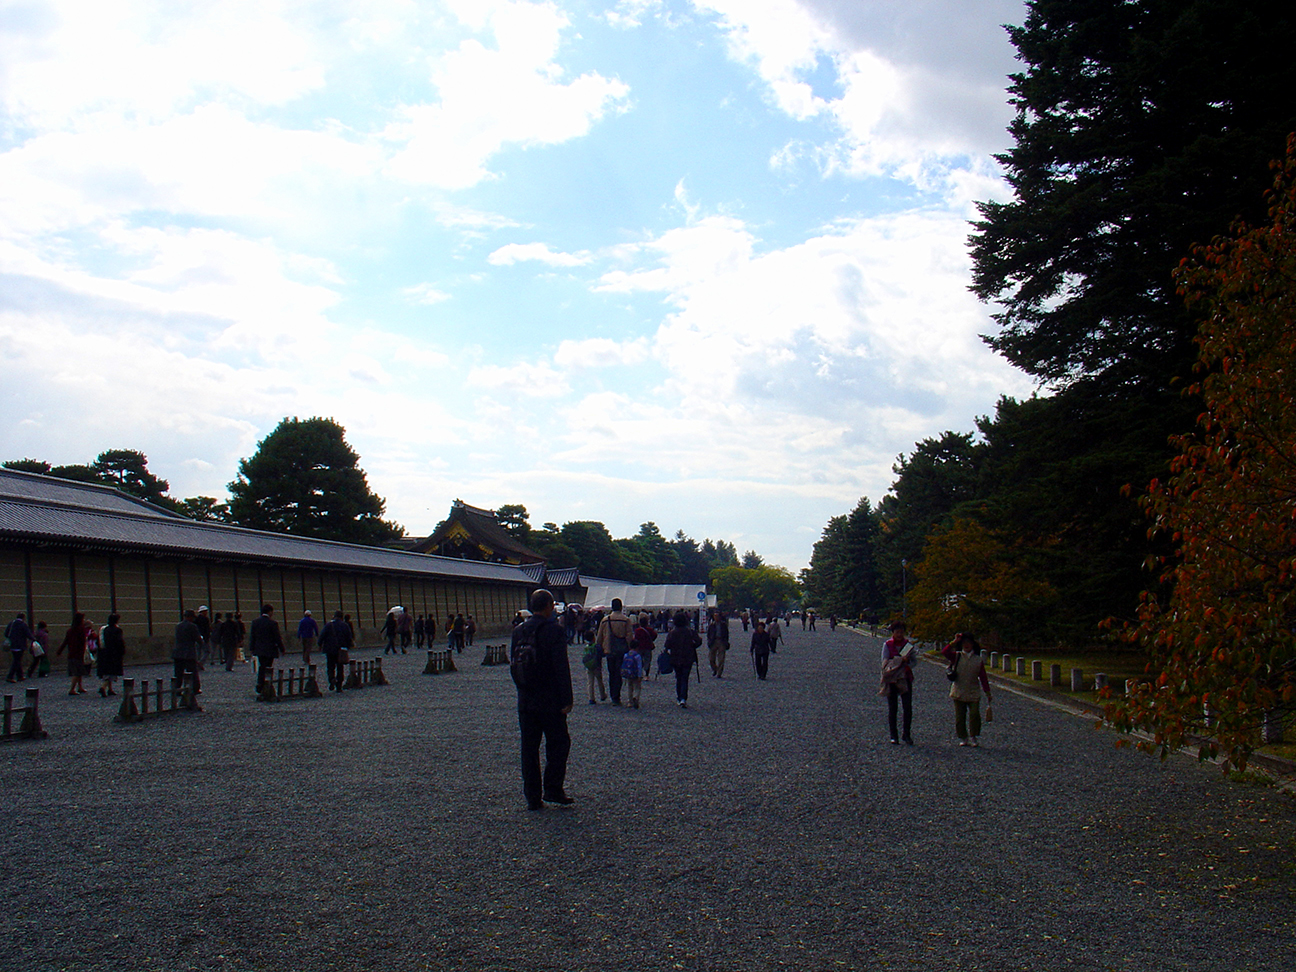 Outside the Imperial Palace